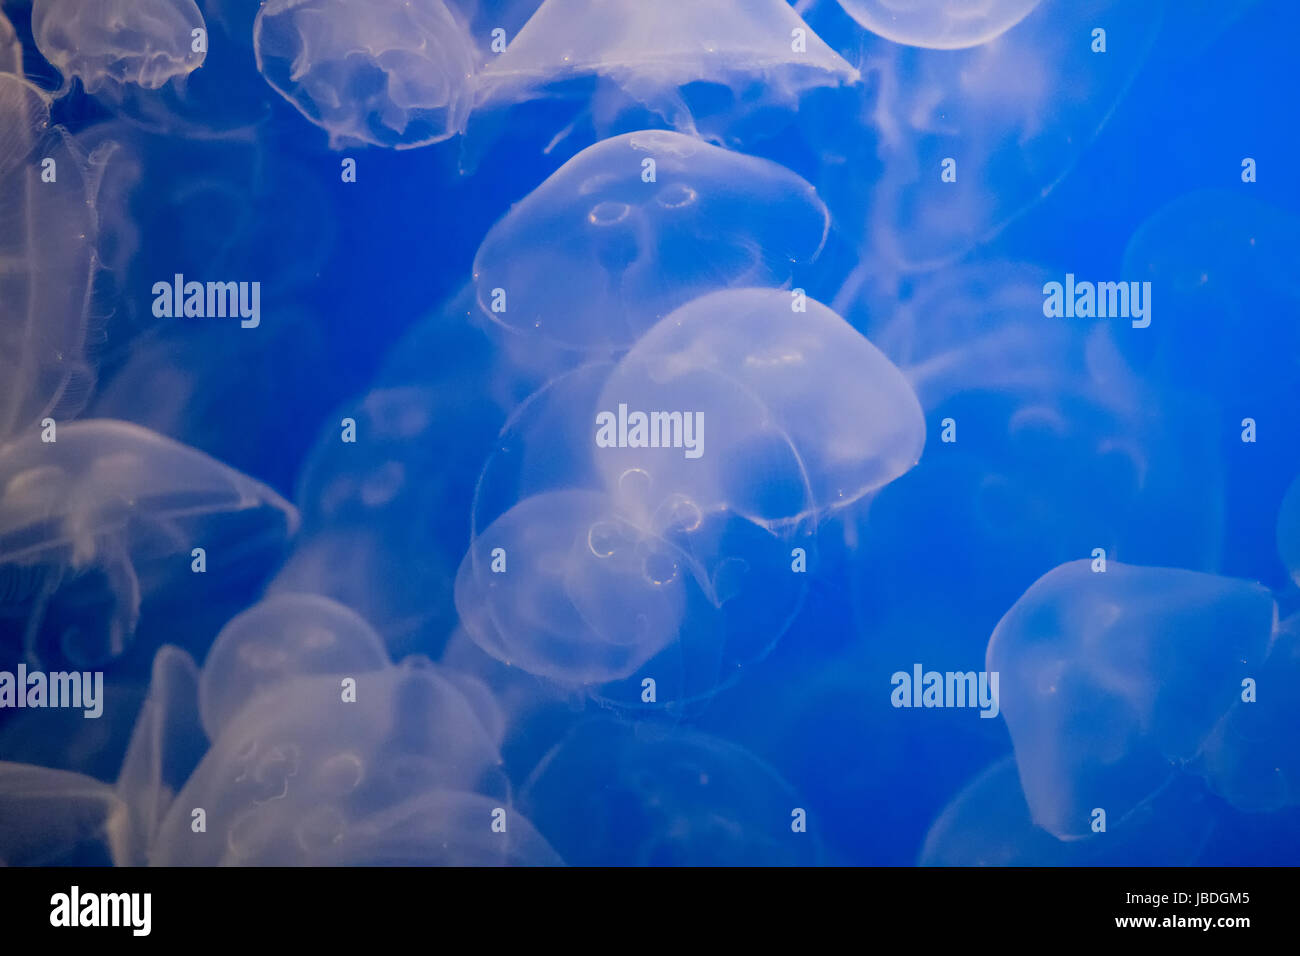 Jelly Fish swimming in ocean Stock Photo